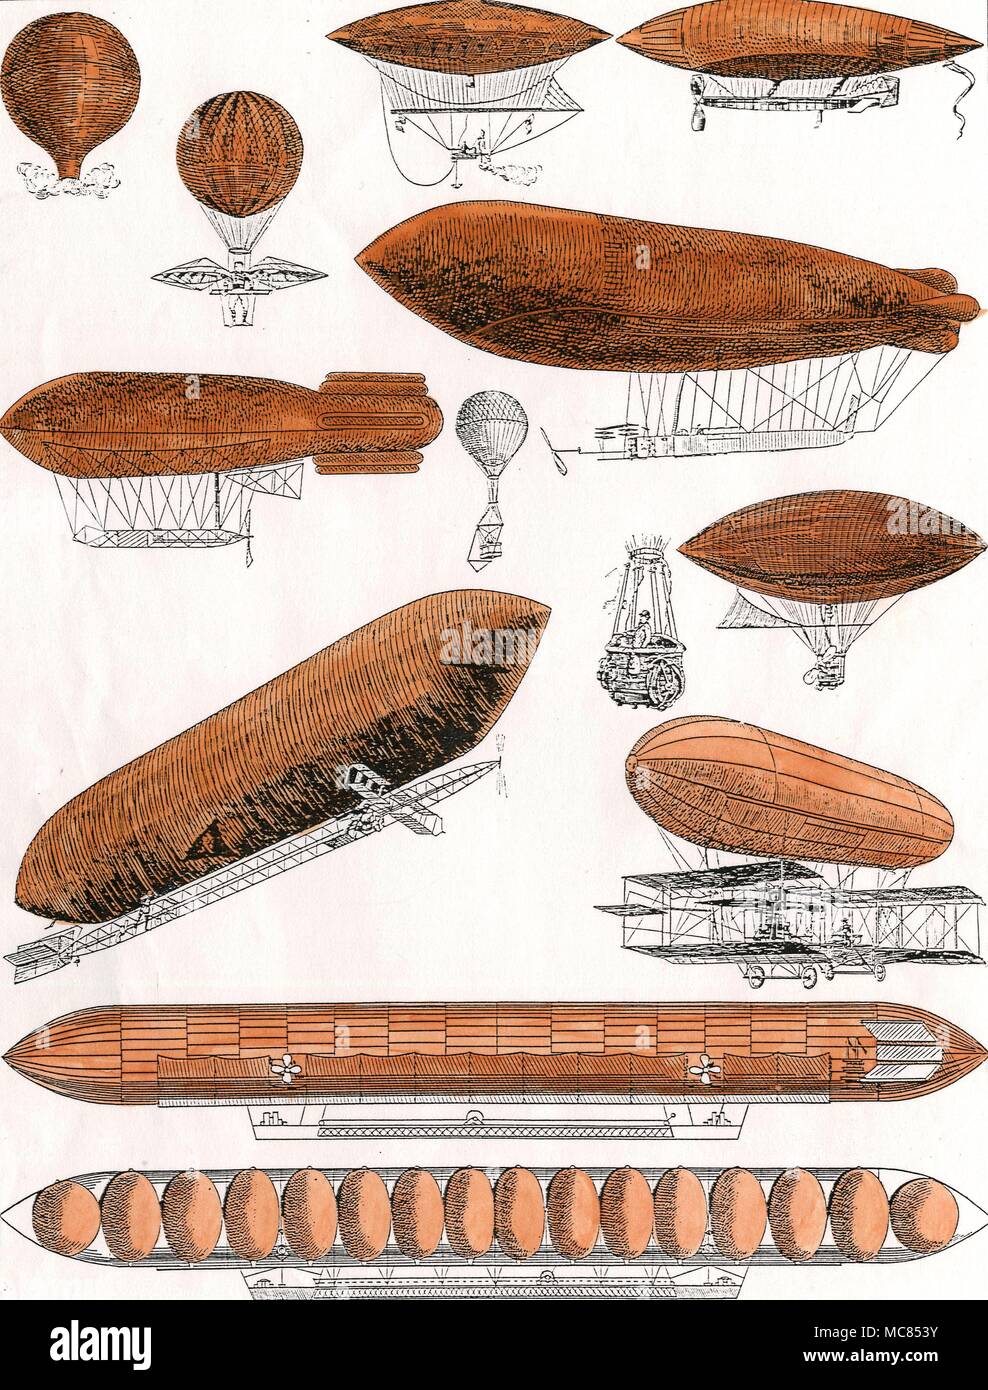 Flying machines Twelve balloons in history, from the Montgolfier of 1783, to the Zeppelin airship of 1900 Stock Photo